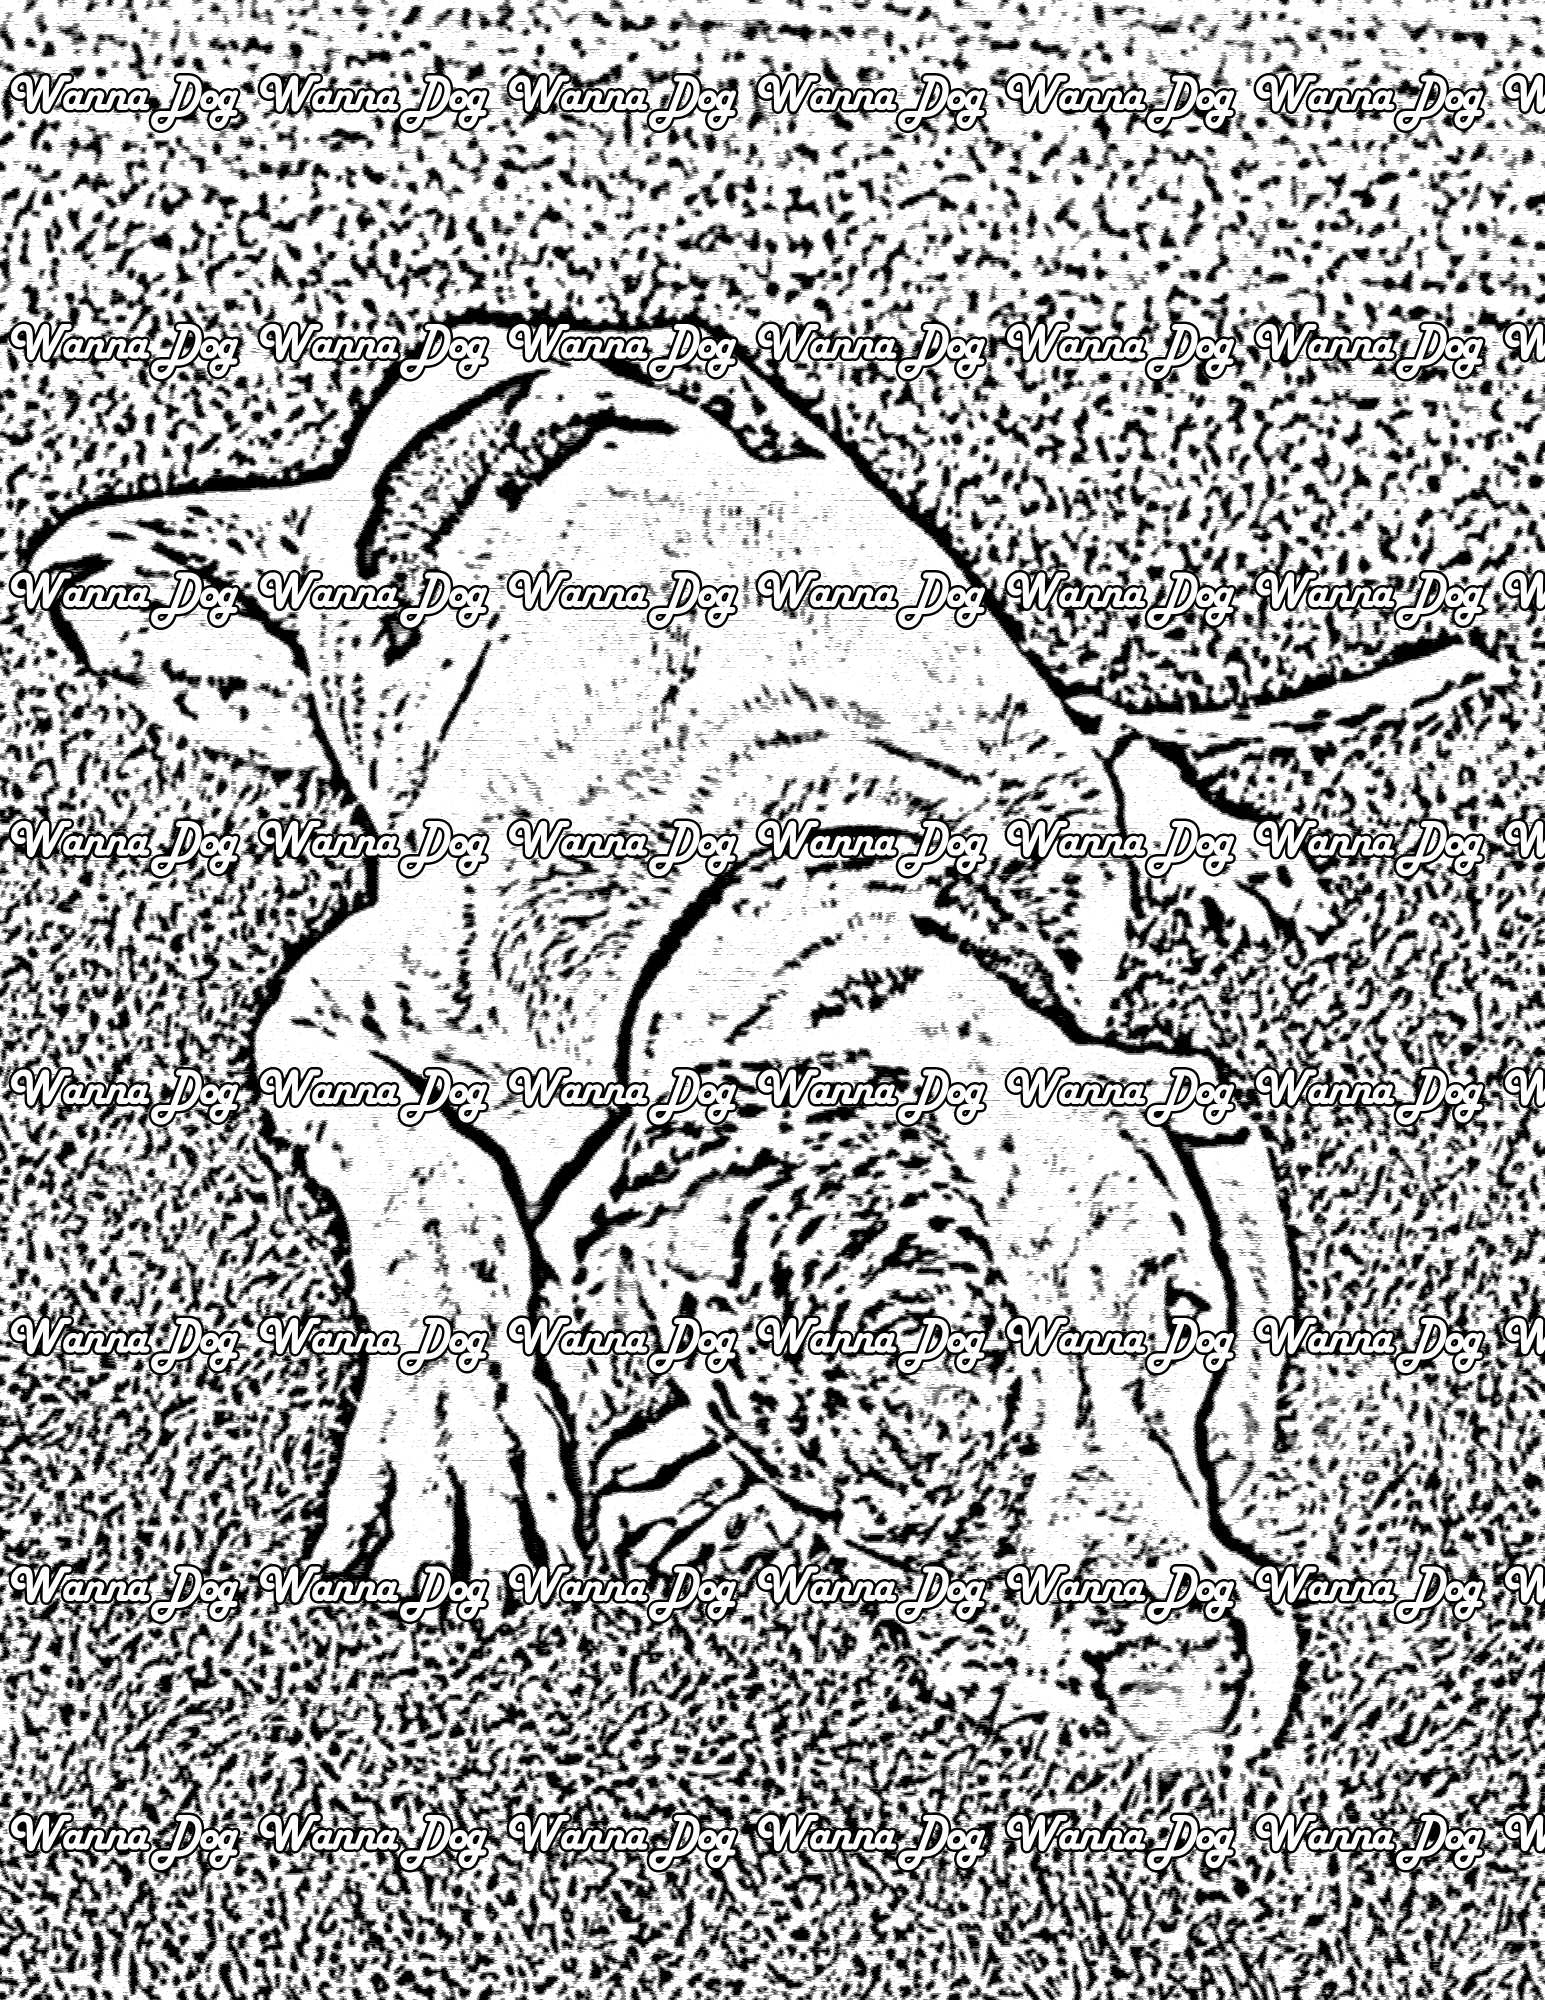 Great Dane Coloring Page of a Great Dane laying on grass